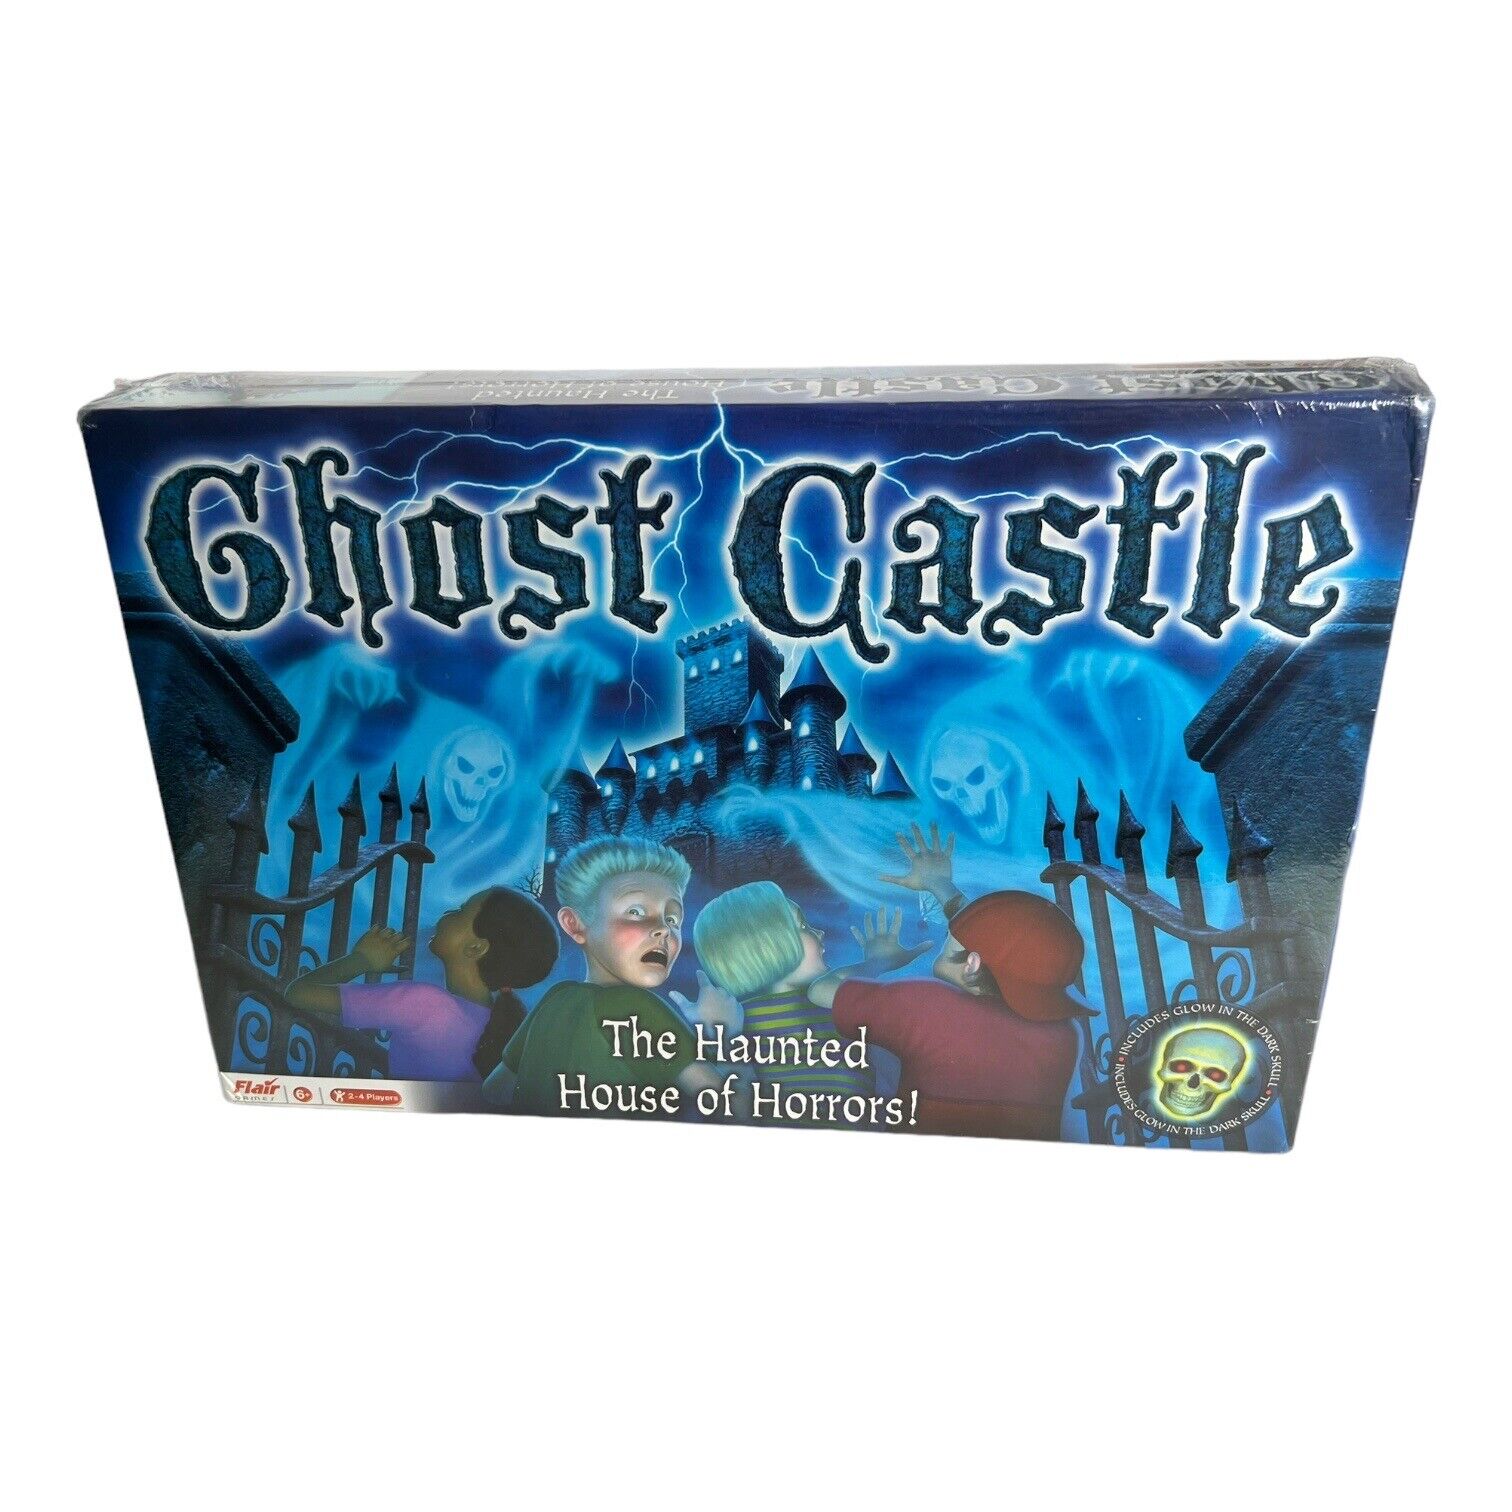 GHOST CASTLE The HAUNTED HOUSE of HORRORS NEW Factory SEALED BOARD GAME Flair ! Flaire Leisure Products Items # 36000 - фотография #20